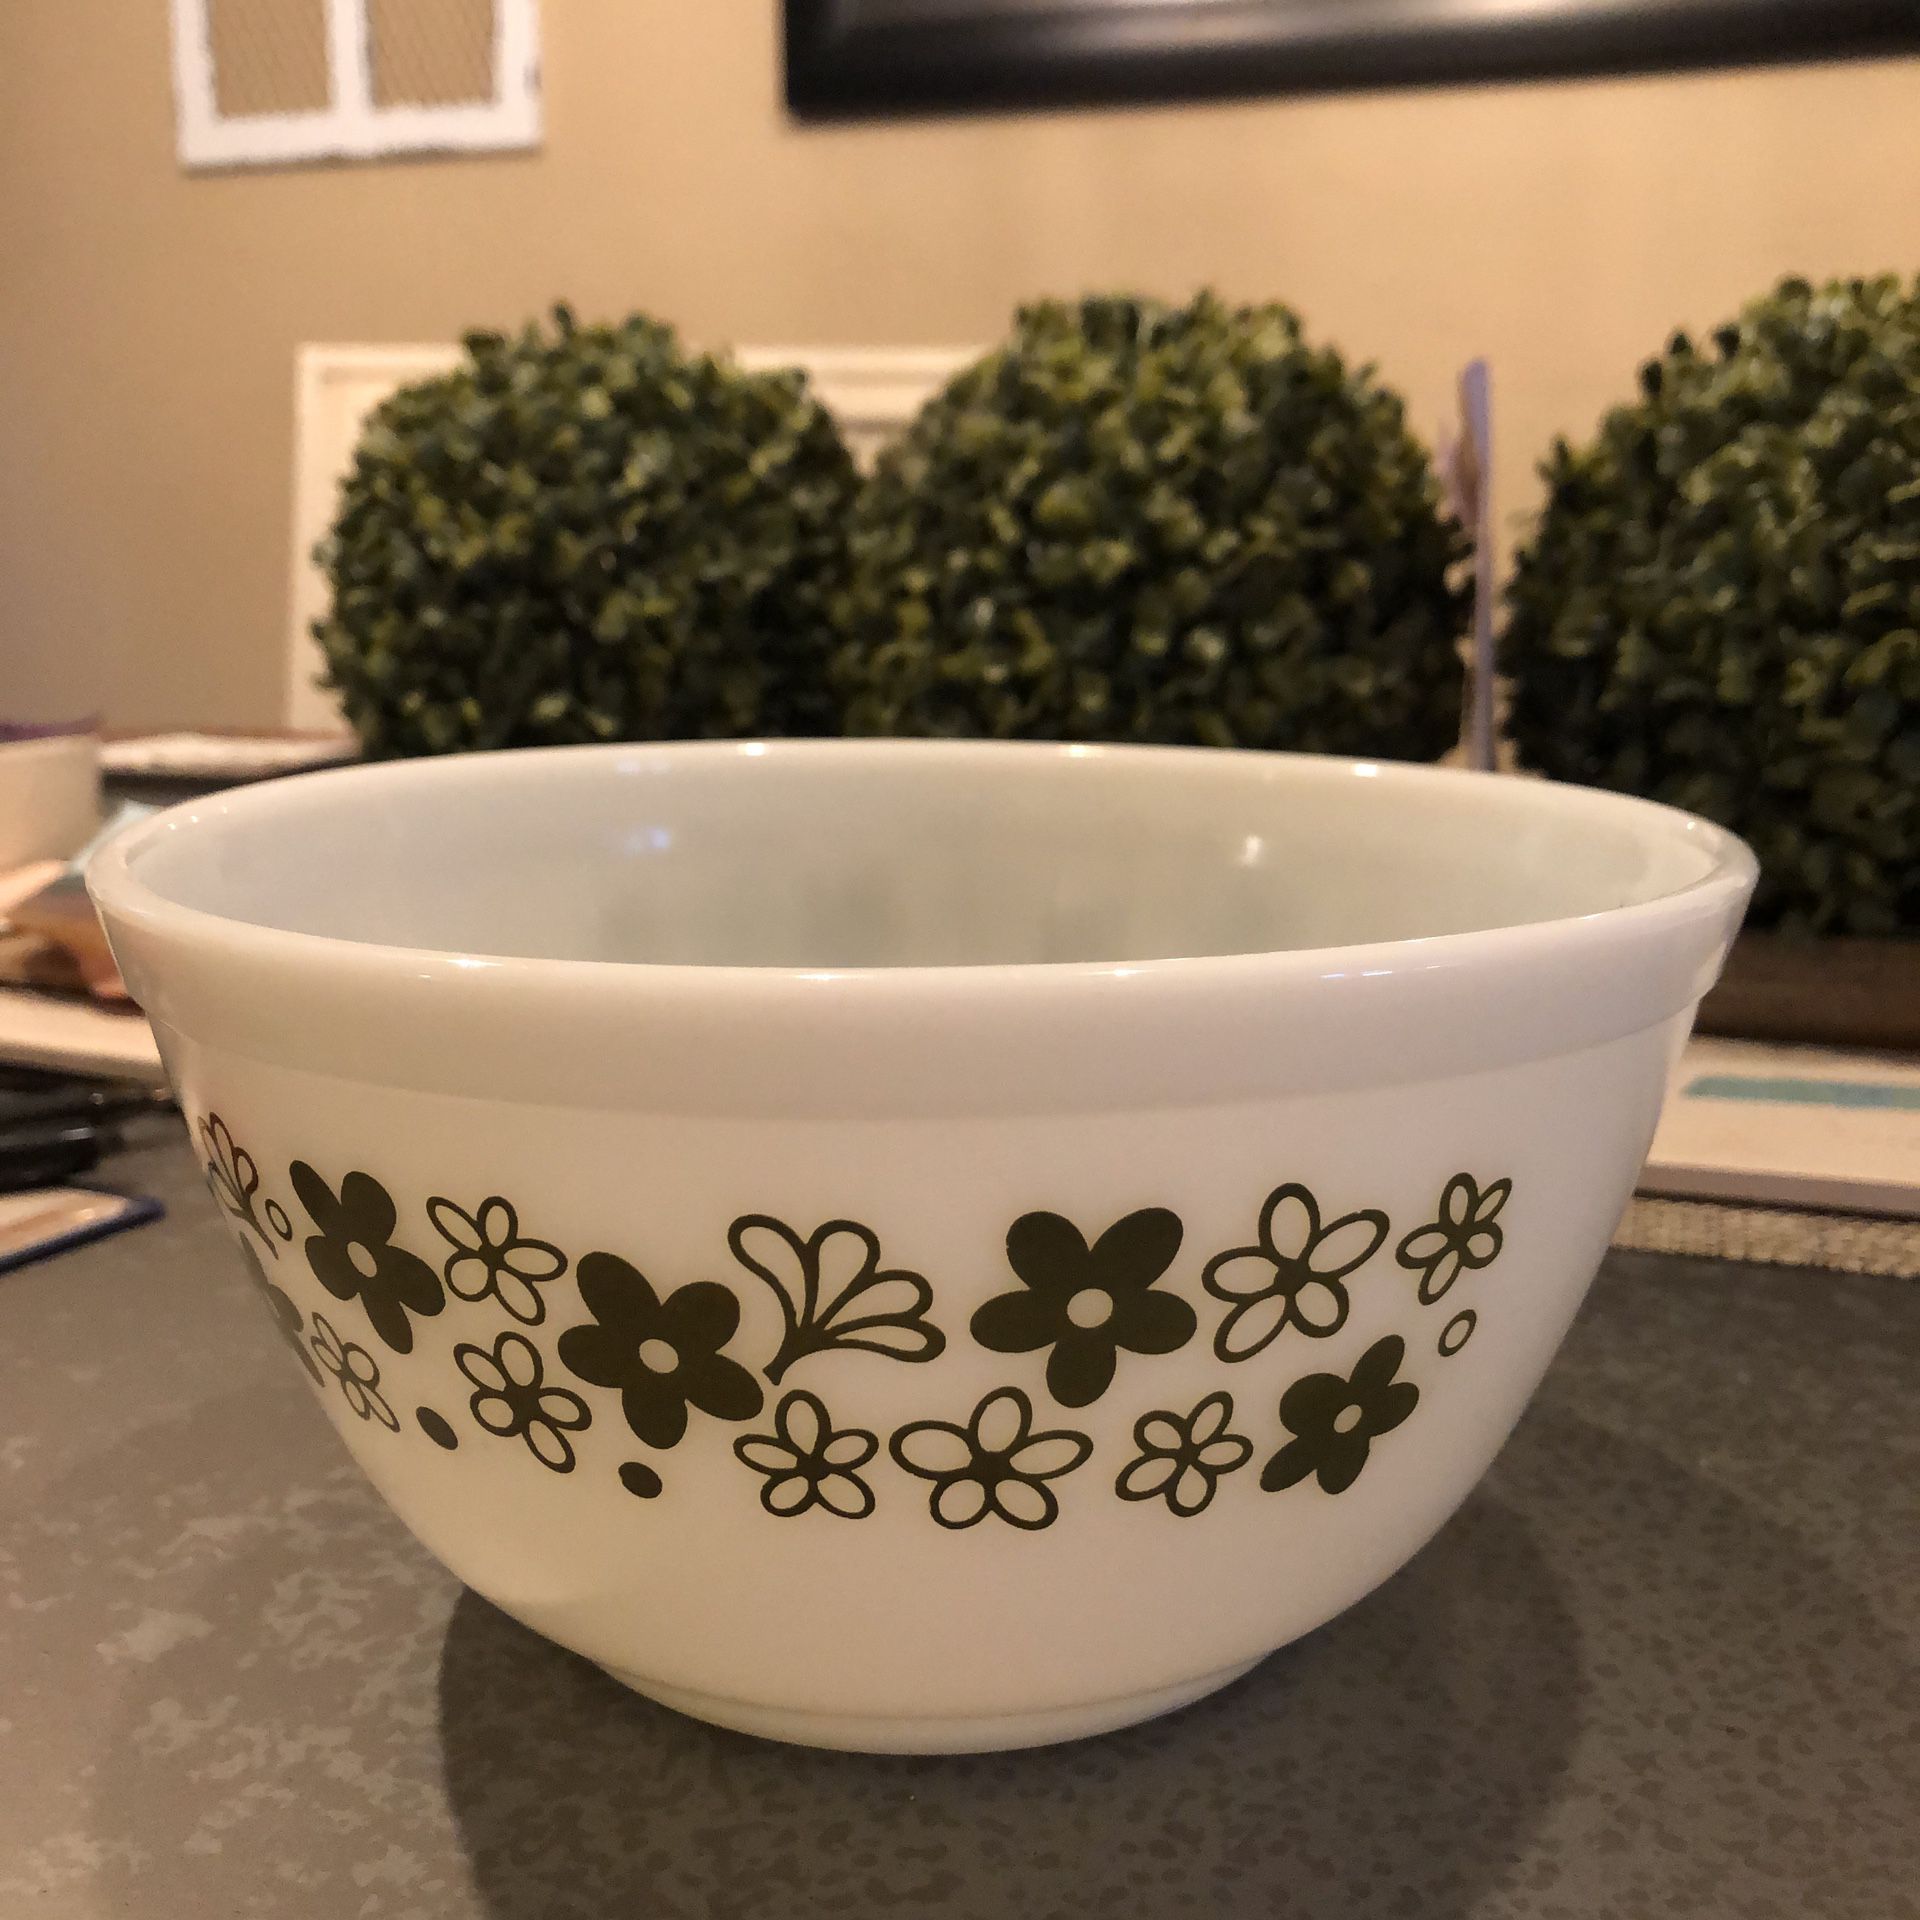 Vintage Pyrex white and green bowl